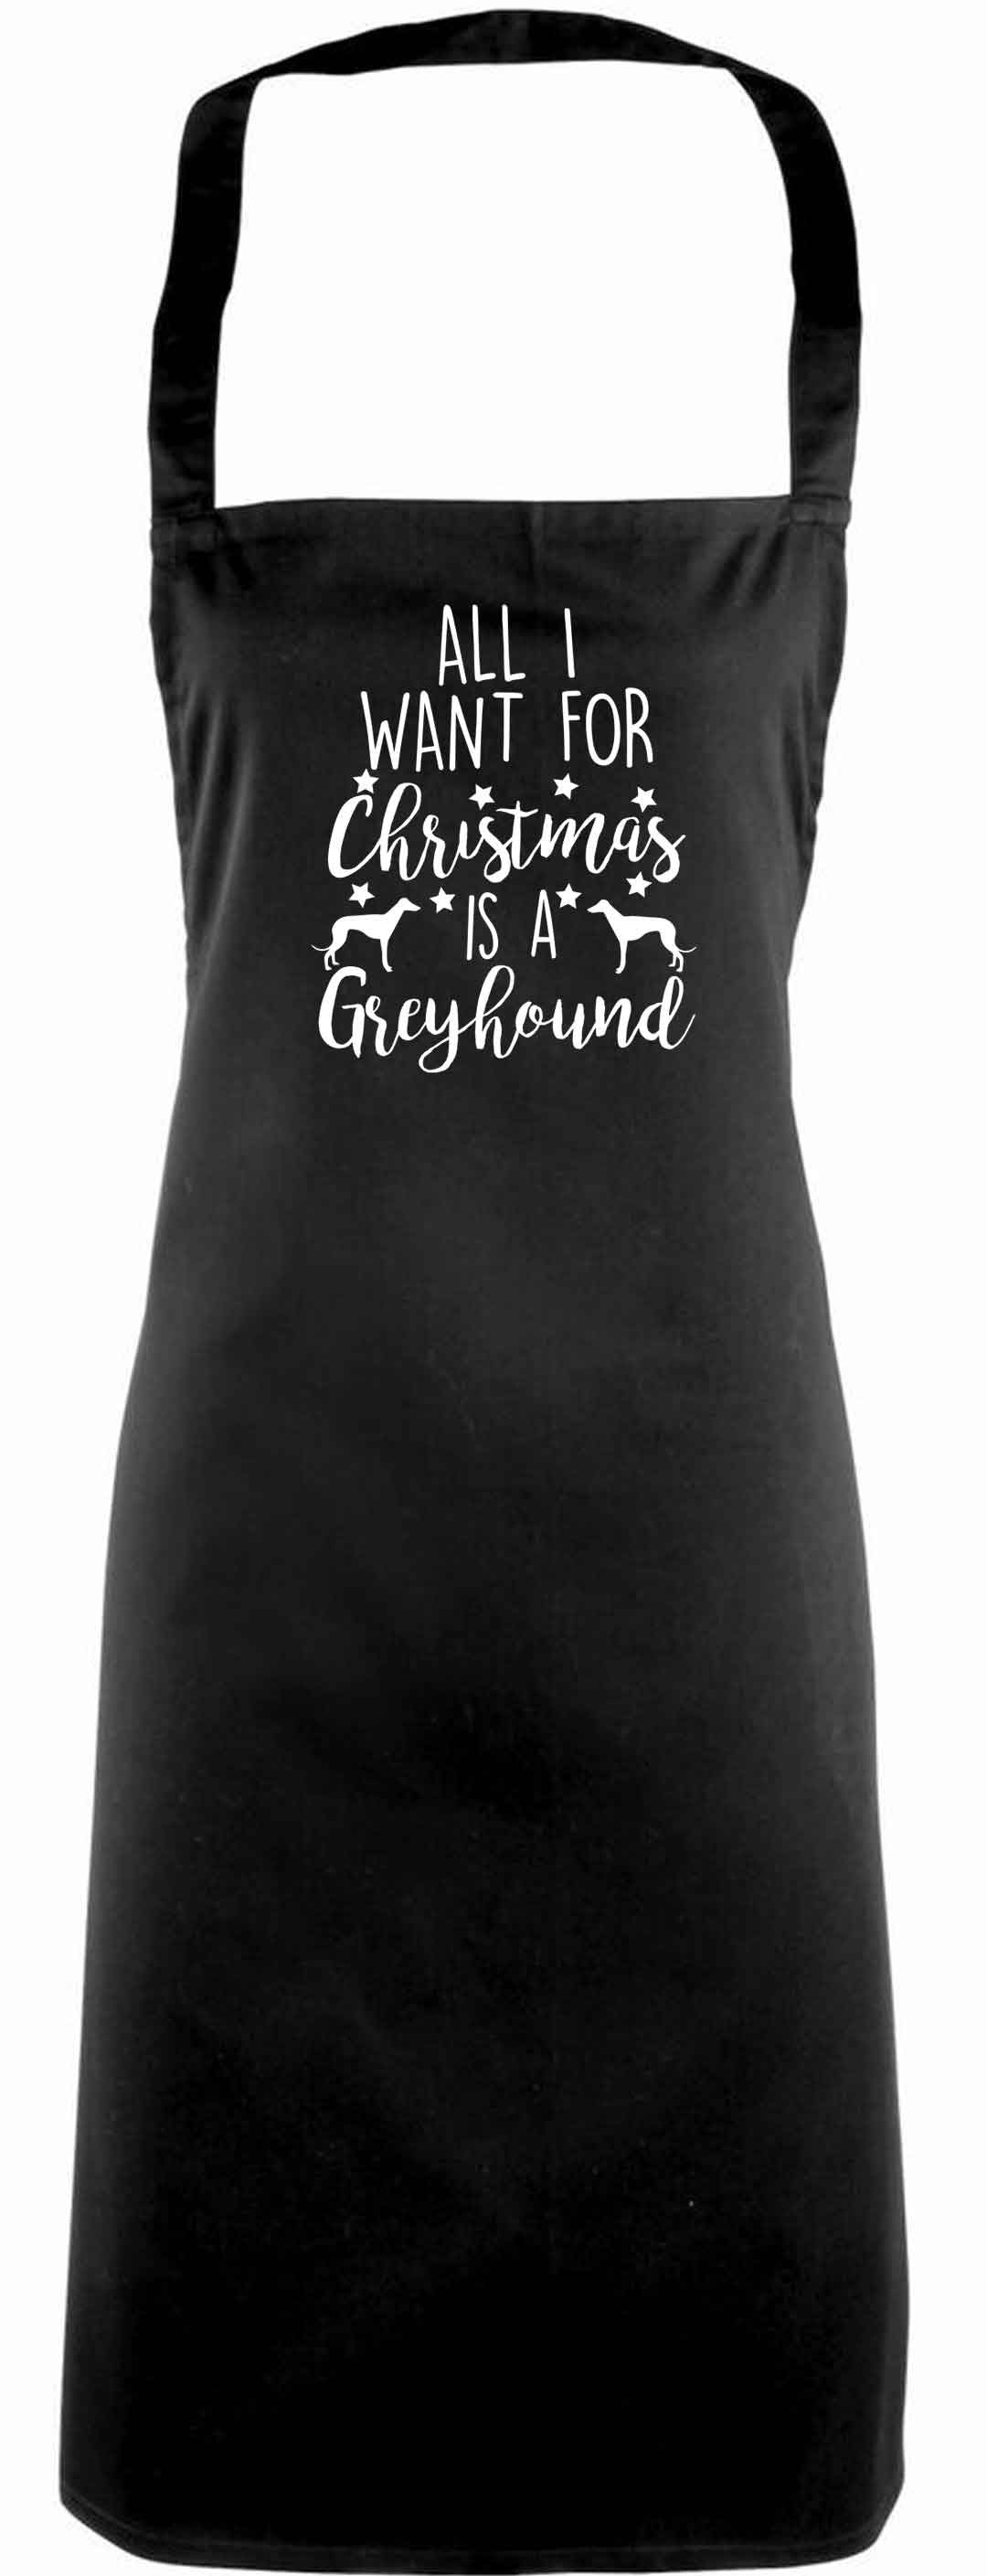 All I want for Christmas is a greyhound adults black apron